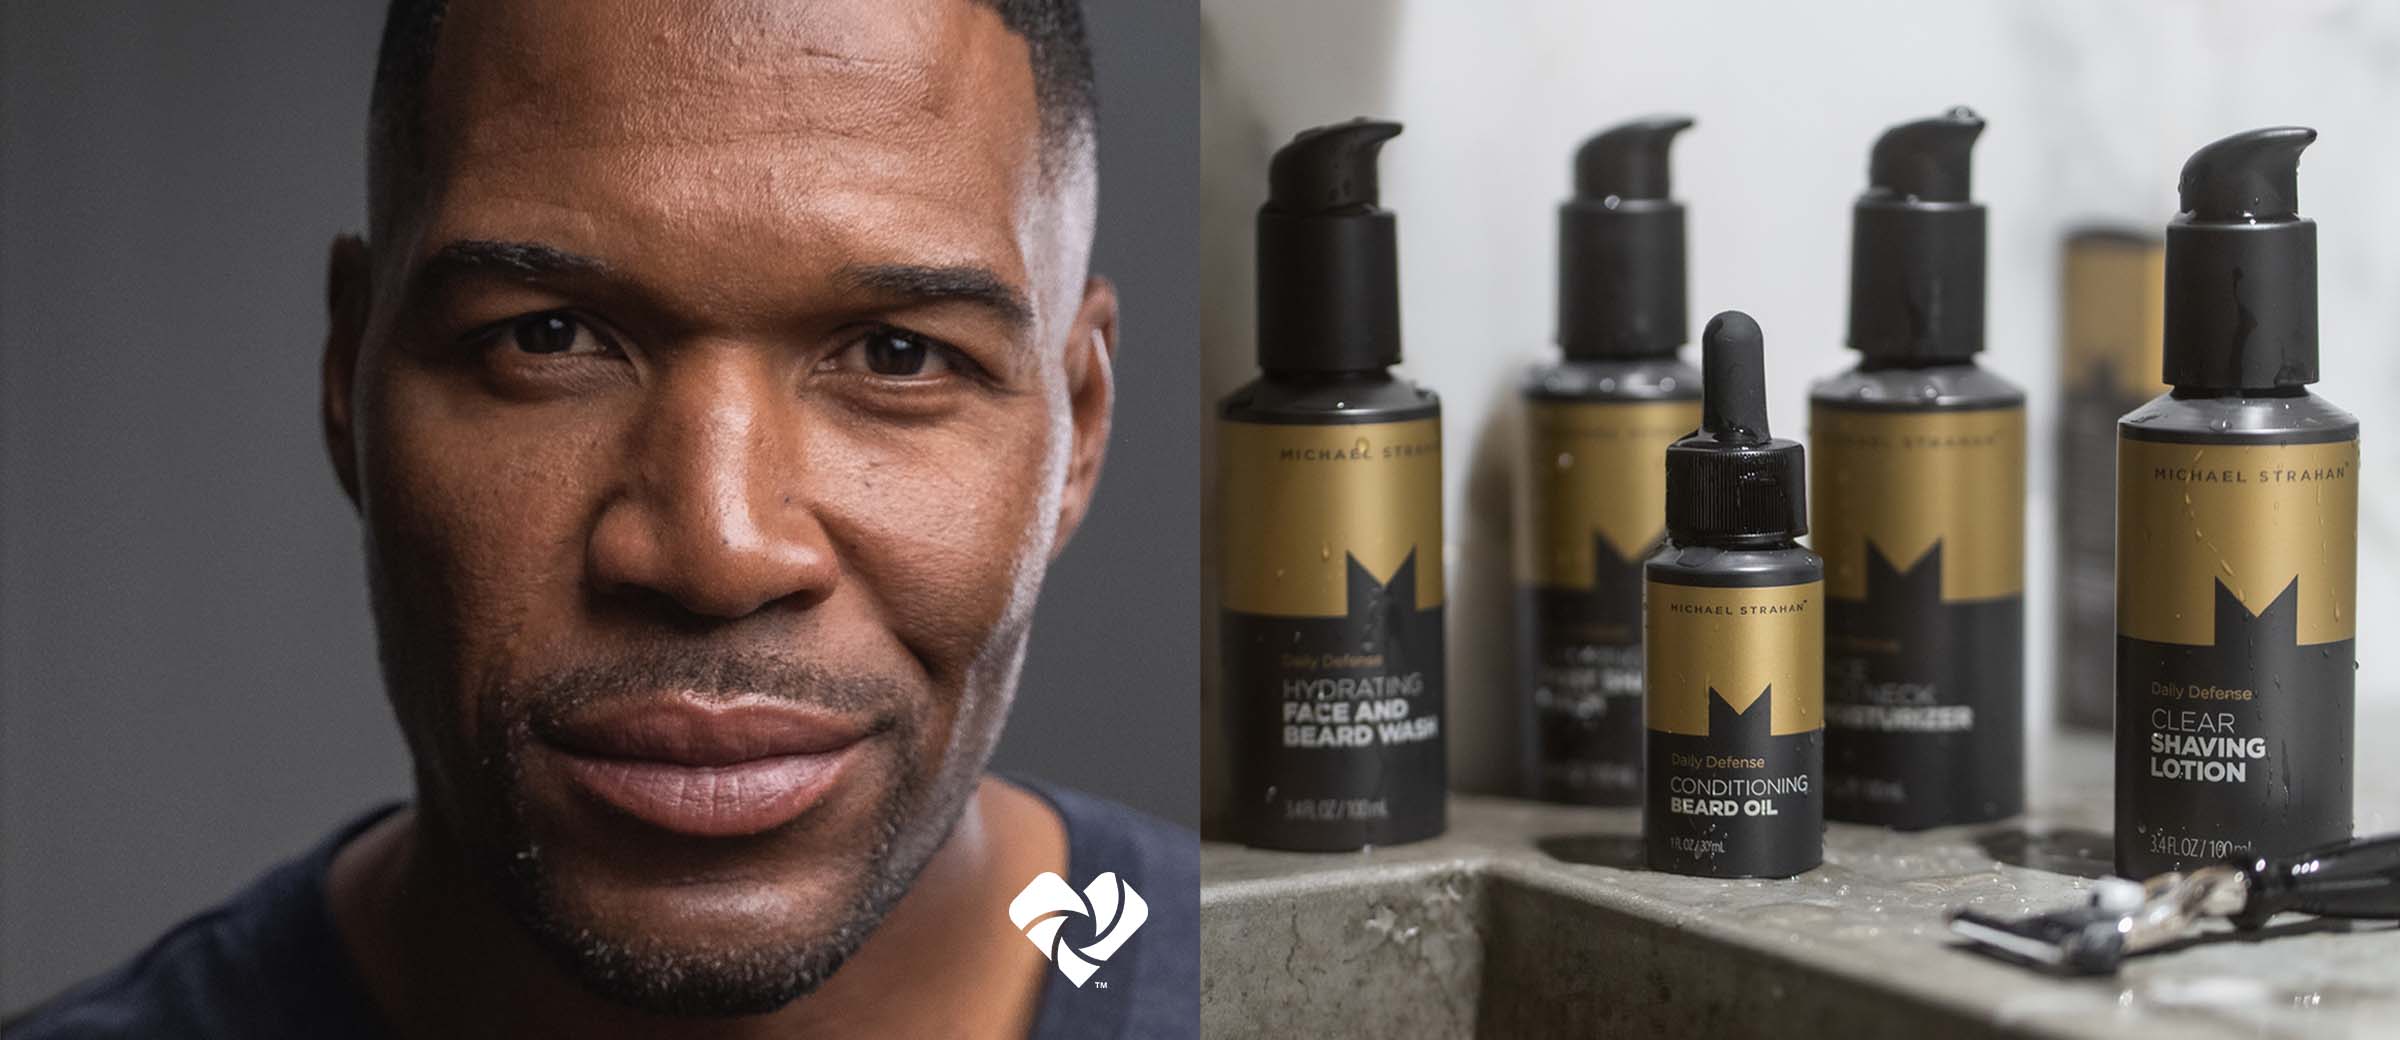 Beauty Unaltered logo, examples of Michael Strahan Daily Defense grooming products